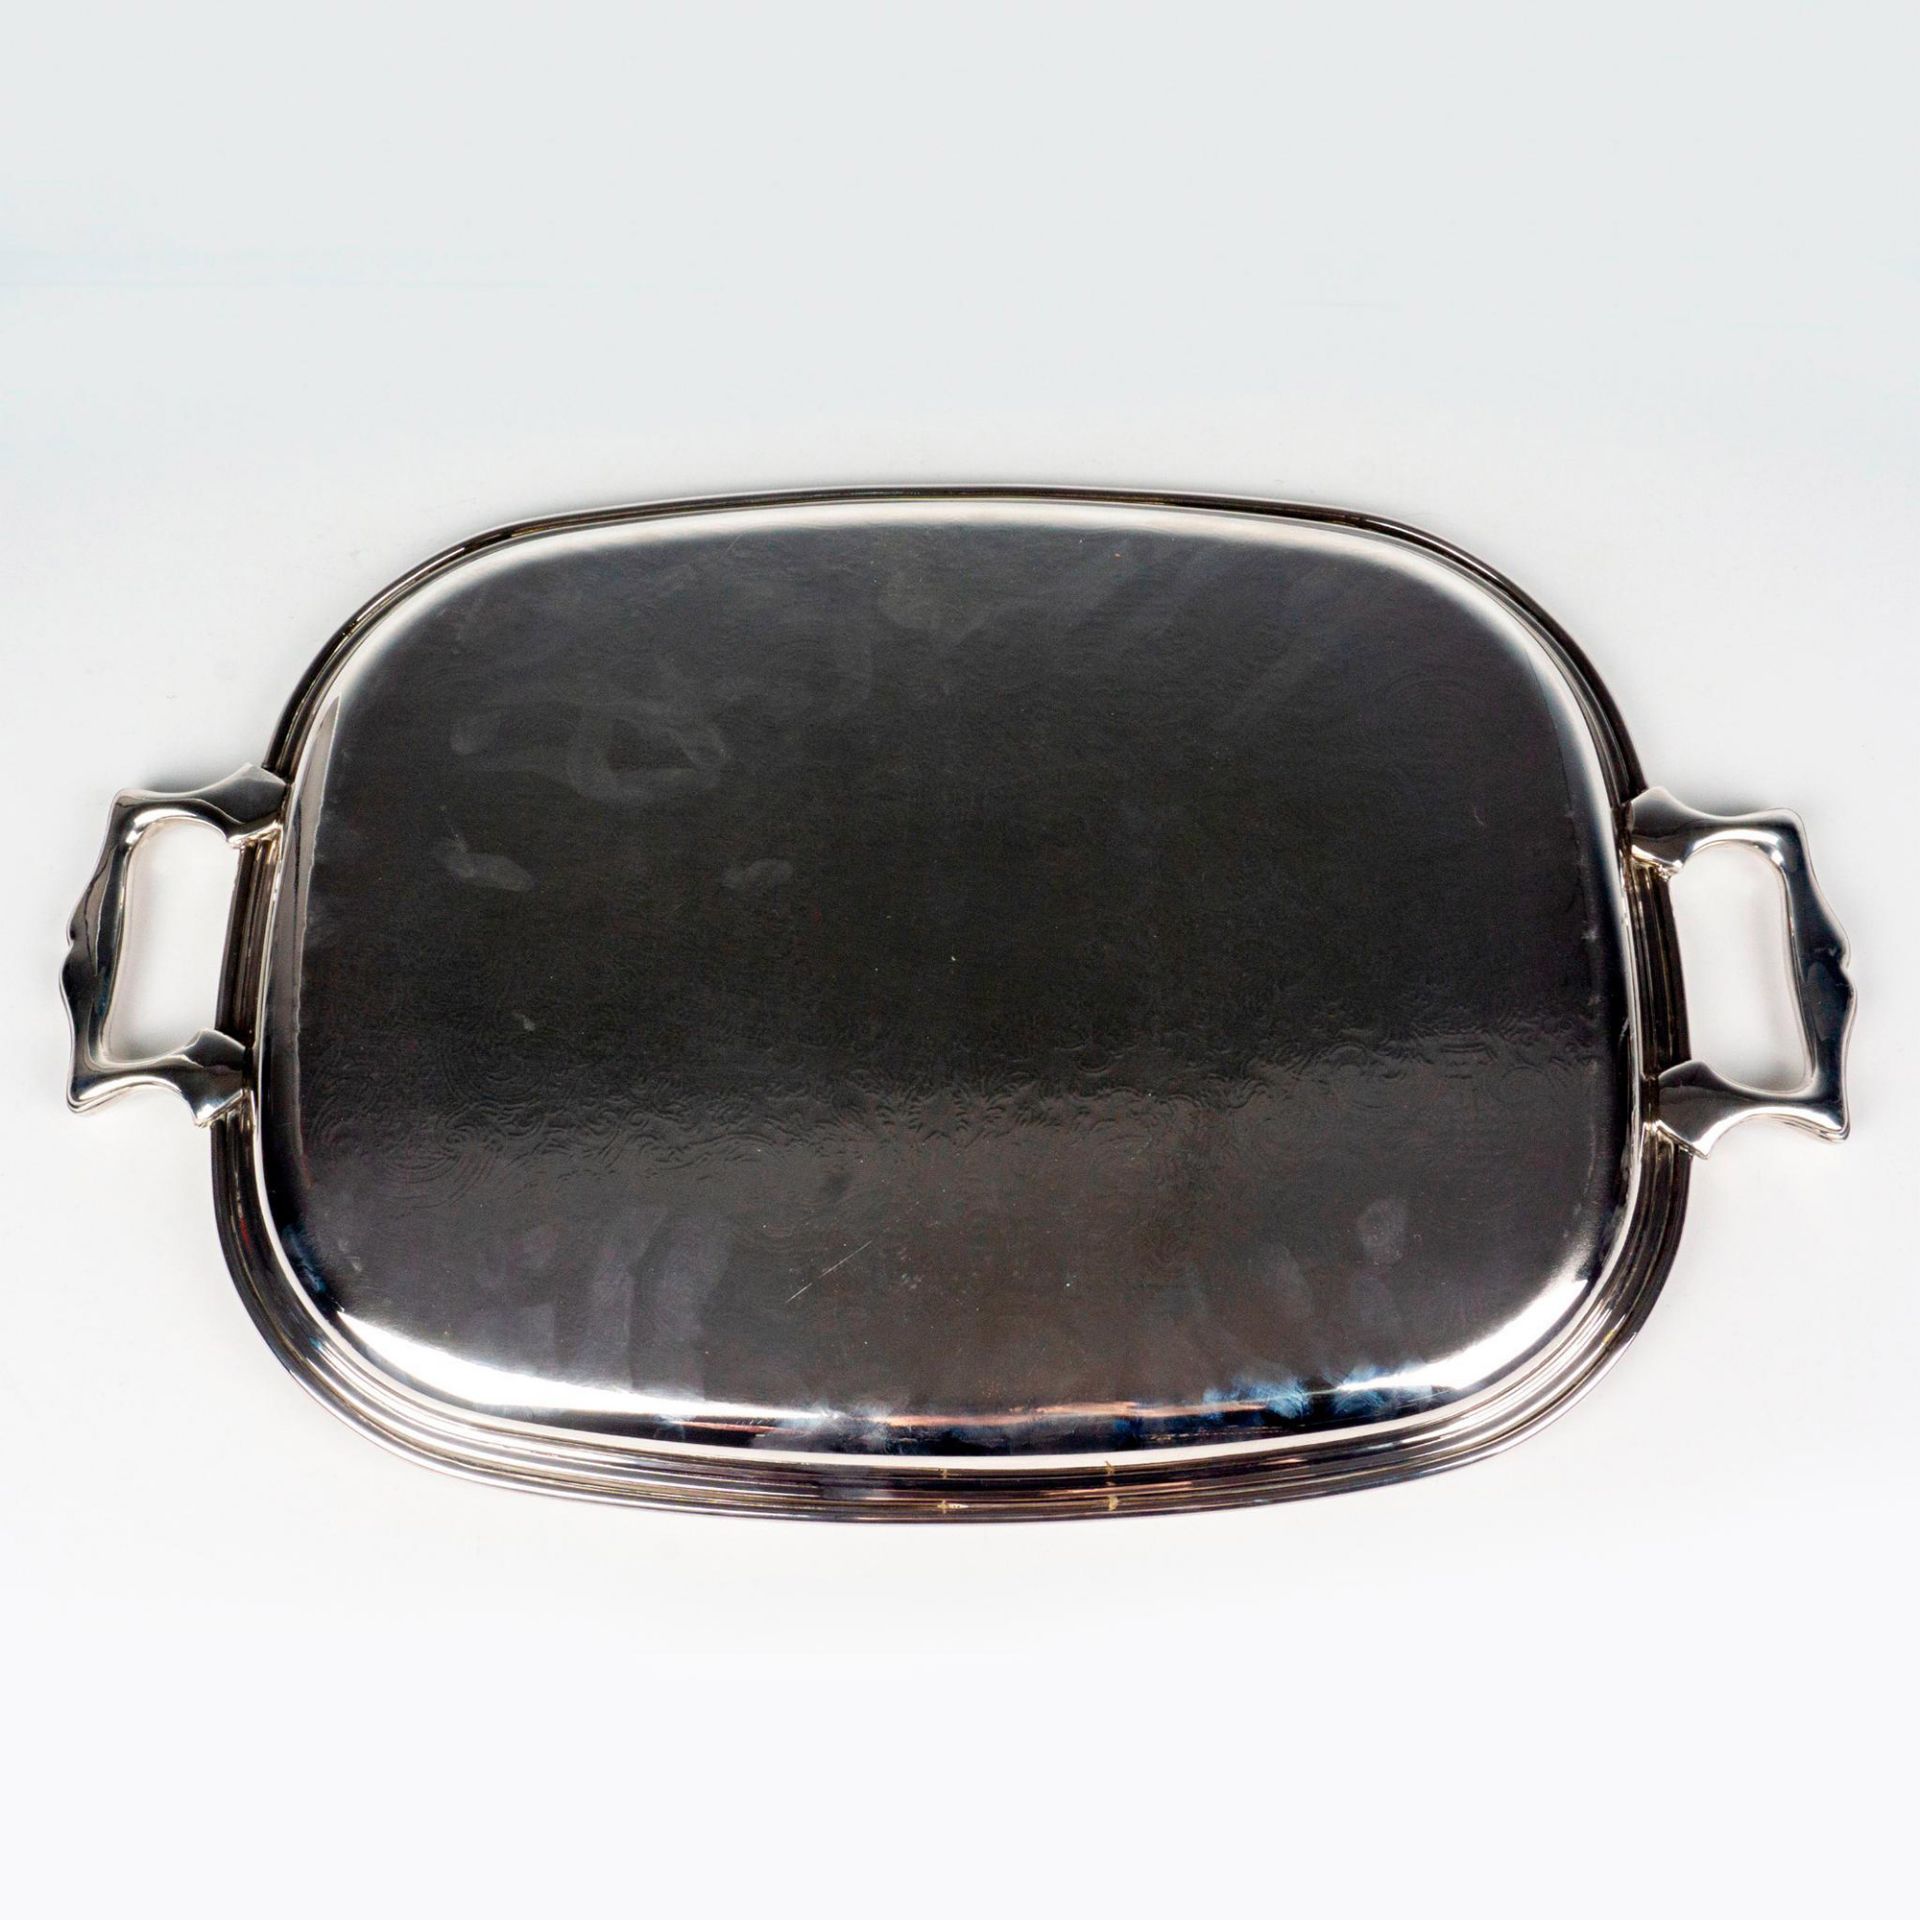 Gorham Newport Silver Plated Serving Tray - Image 2 of 2